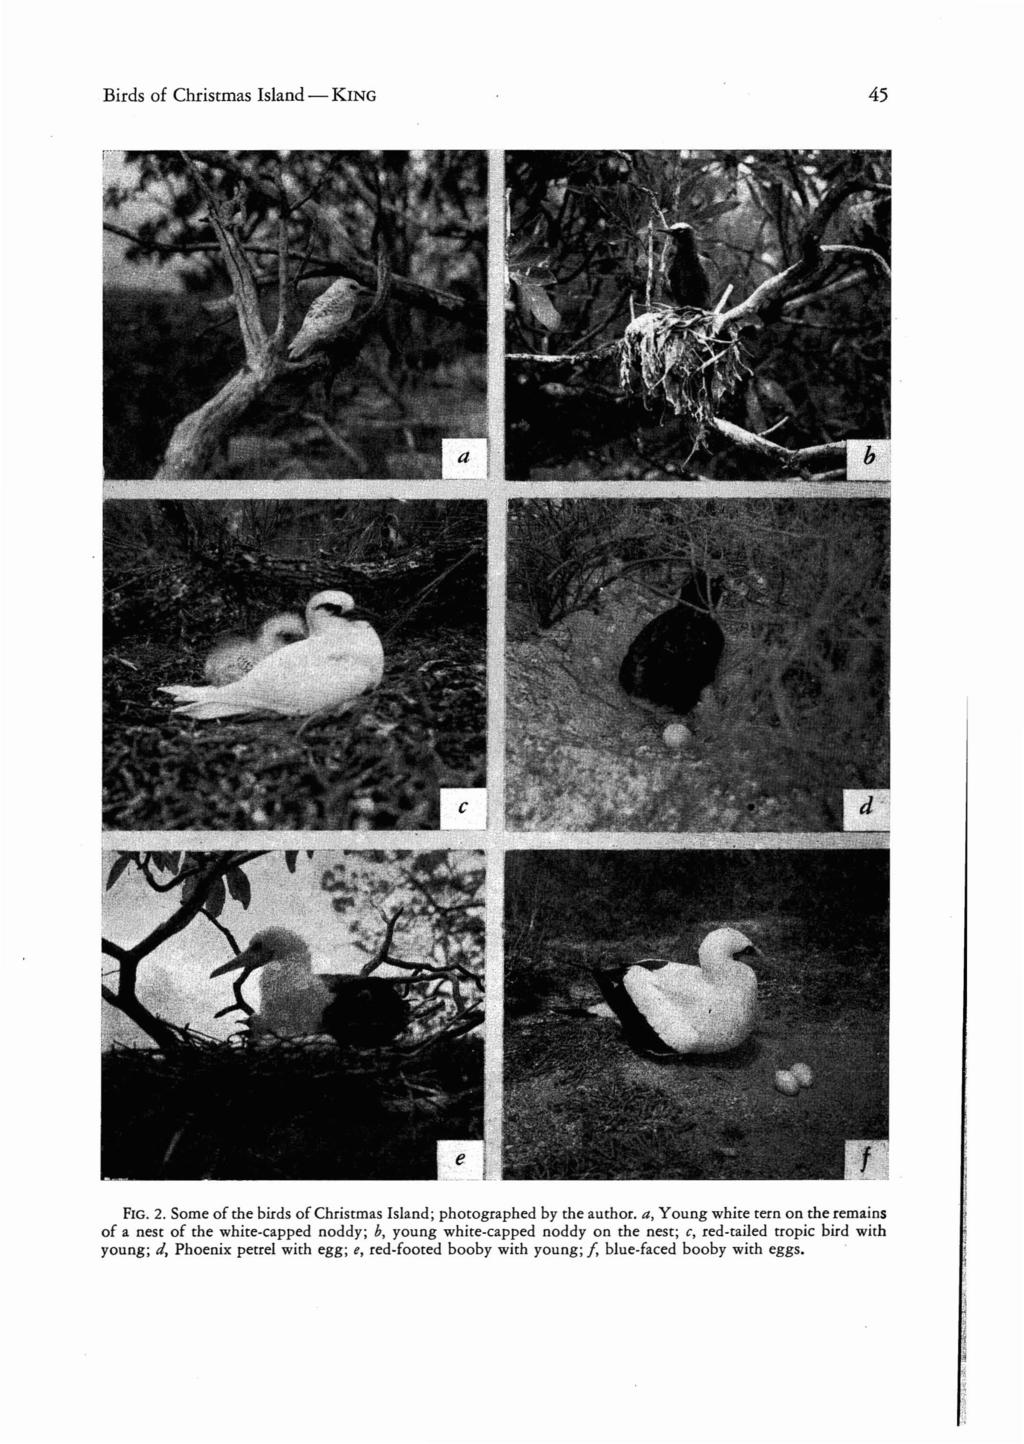 Birds of Christmas Island - KING 45 FIG. 2. Some of the birds ofchristmas Island; photographed by the author.